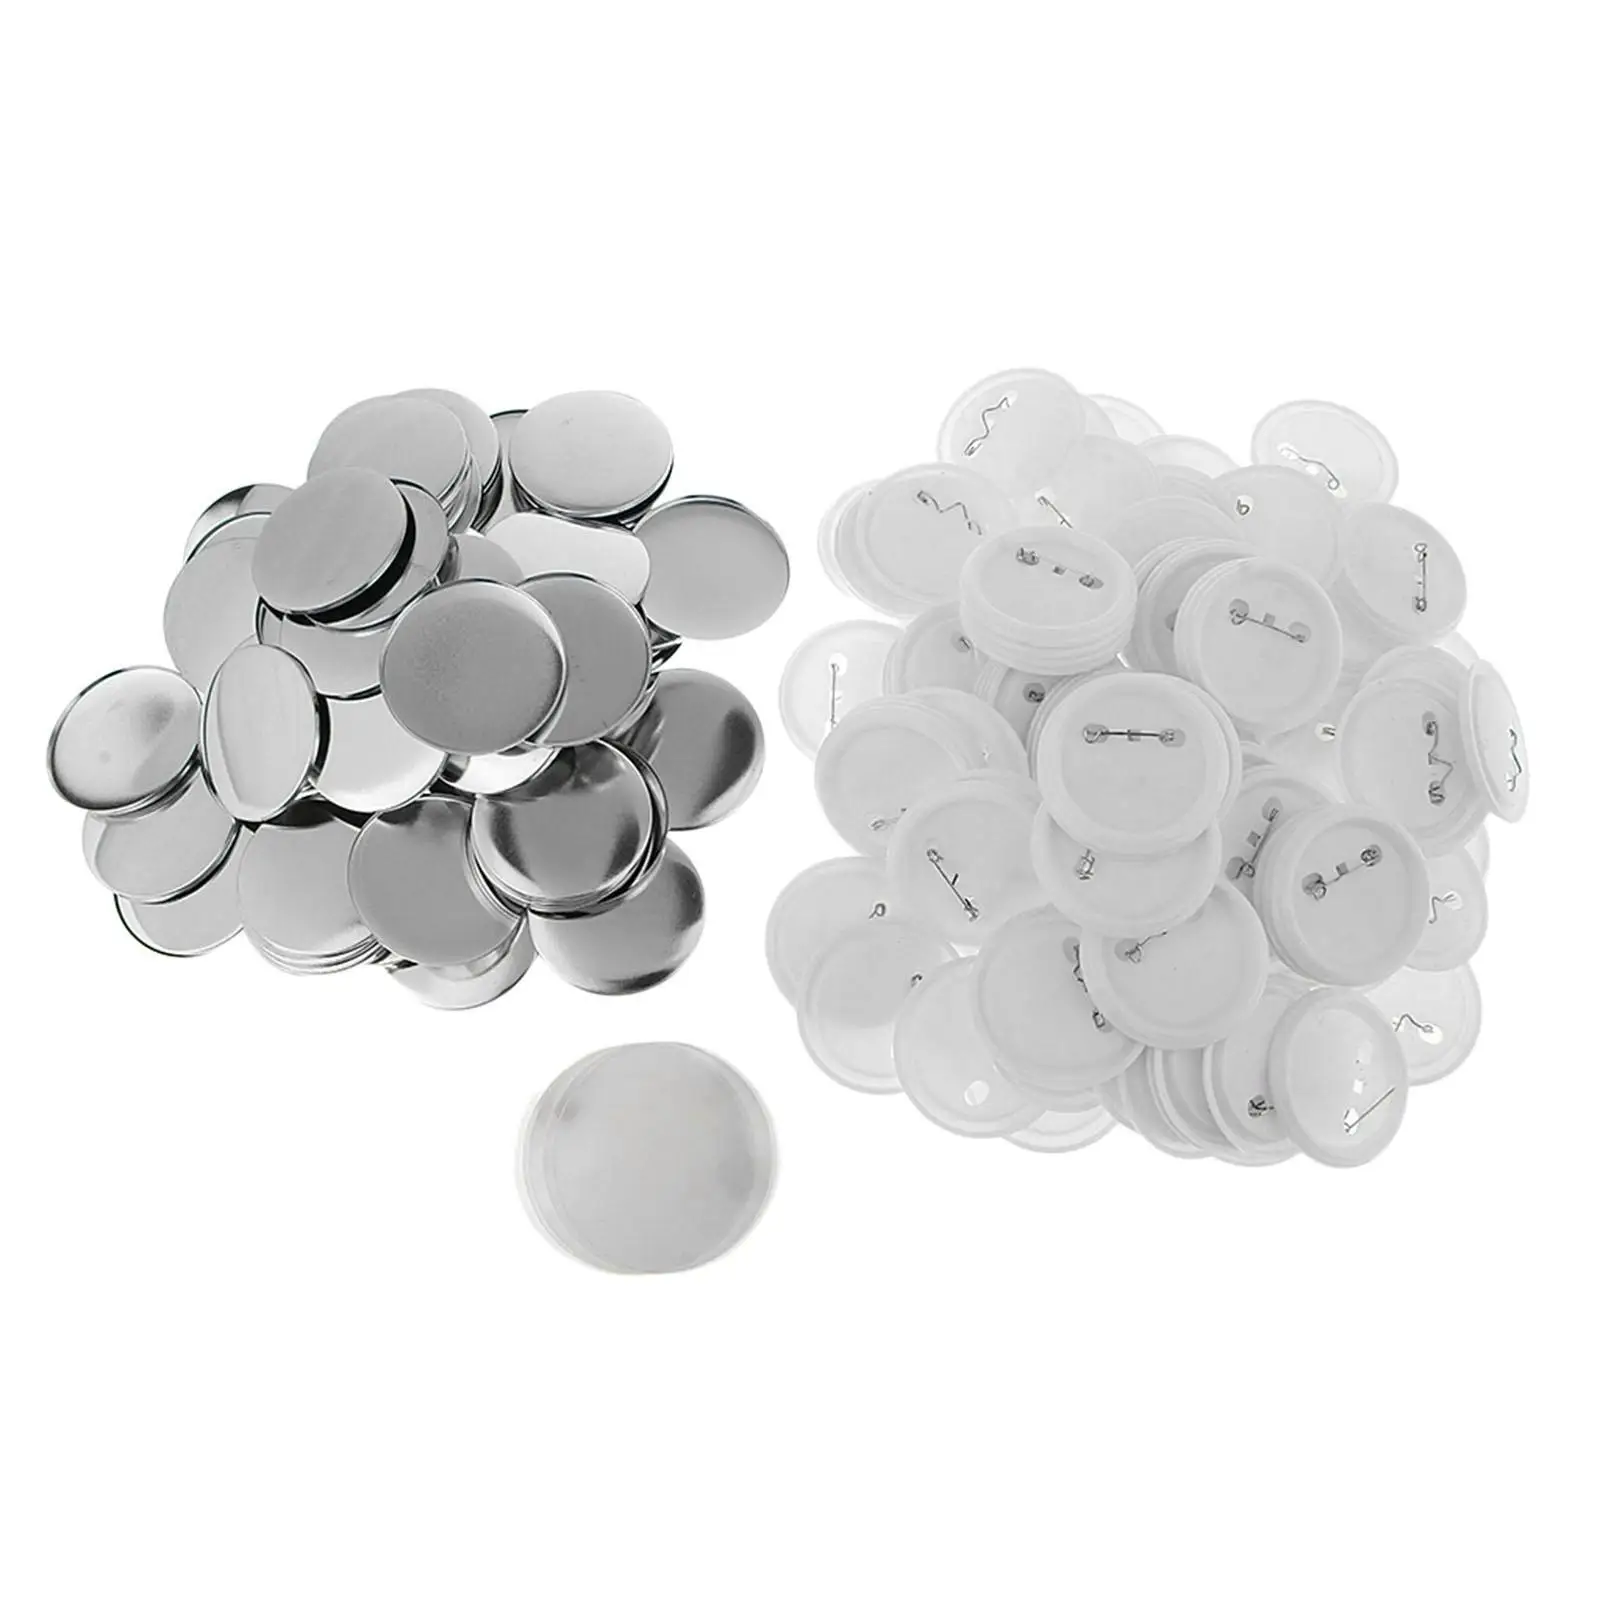 100 Sets Blank Button Making Supplies Empty DIY Pins for Button Maker Machine Souvenirs Presents with Metal Cover, Base, Film